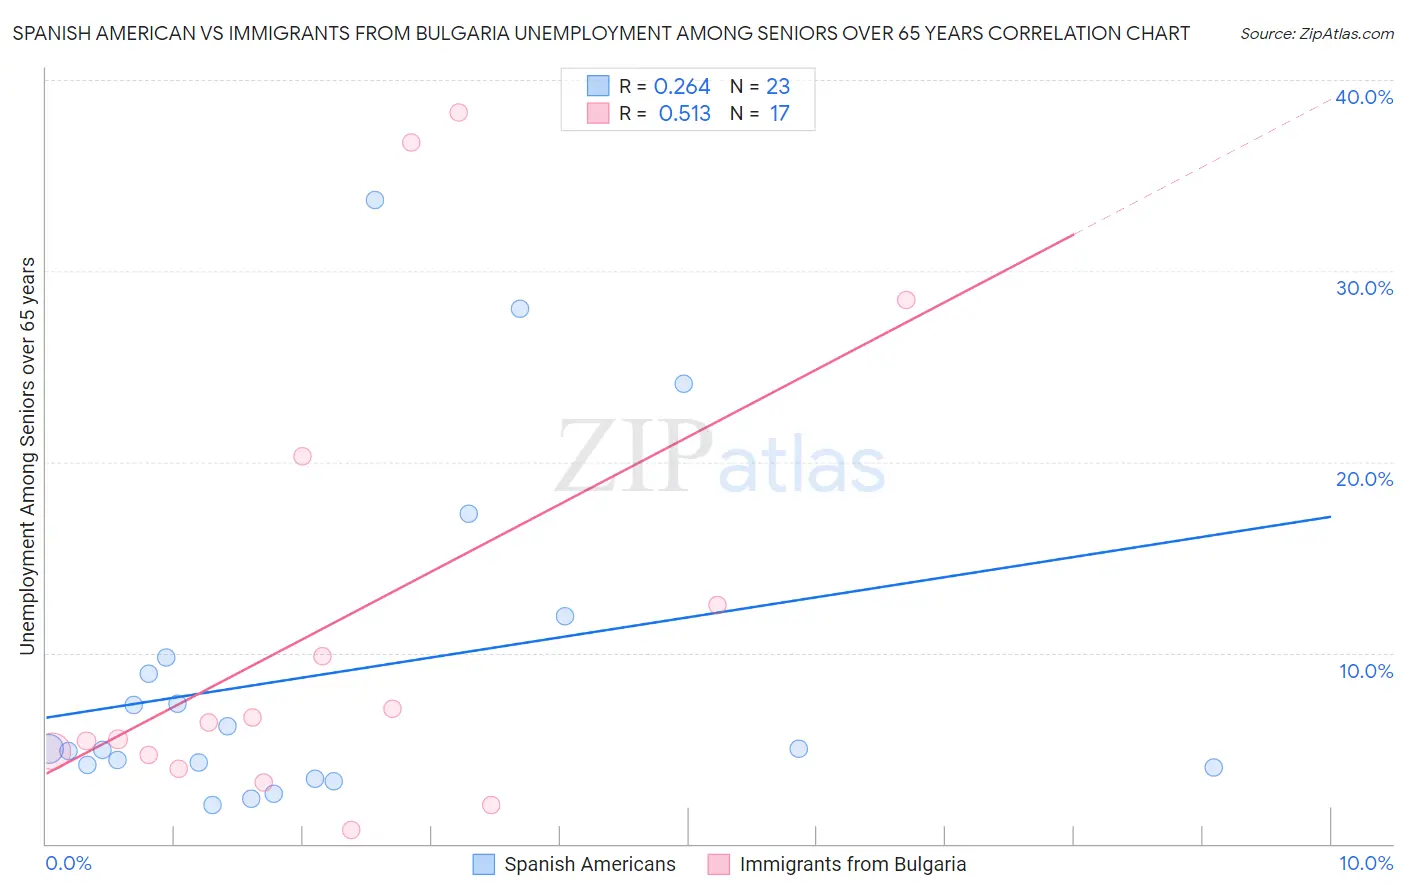 Spanish American vs Immigrants from Bulgaria Unemployment Among Seniors over 65 years